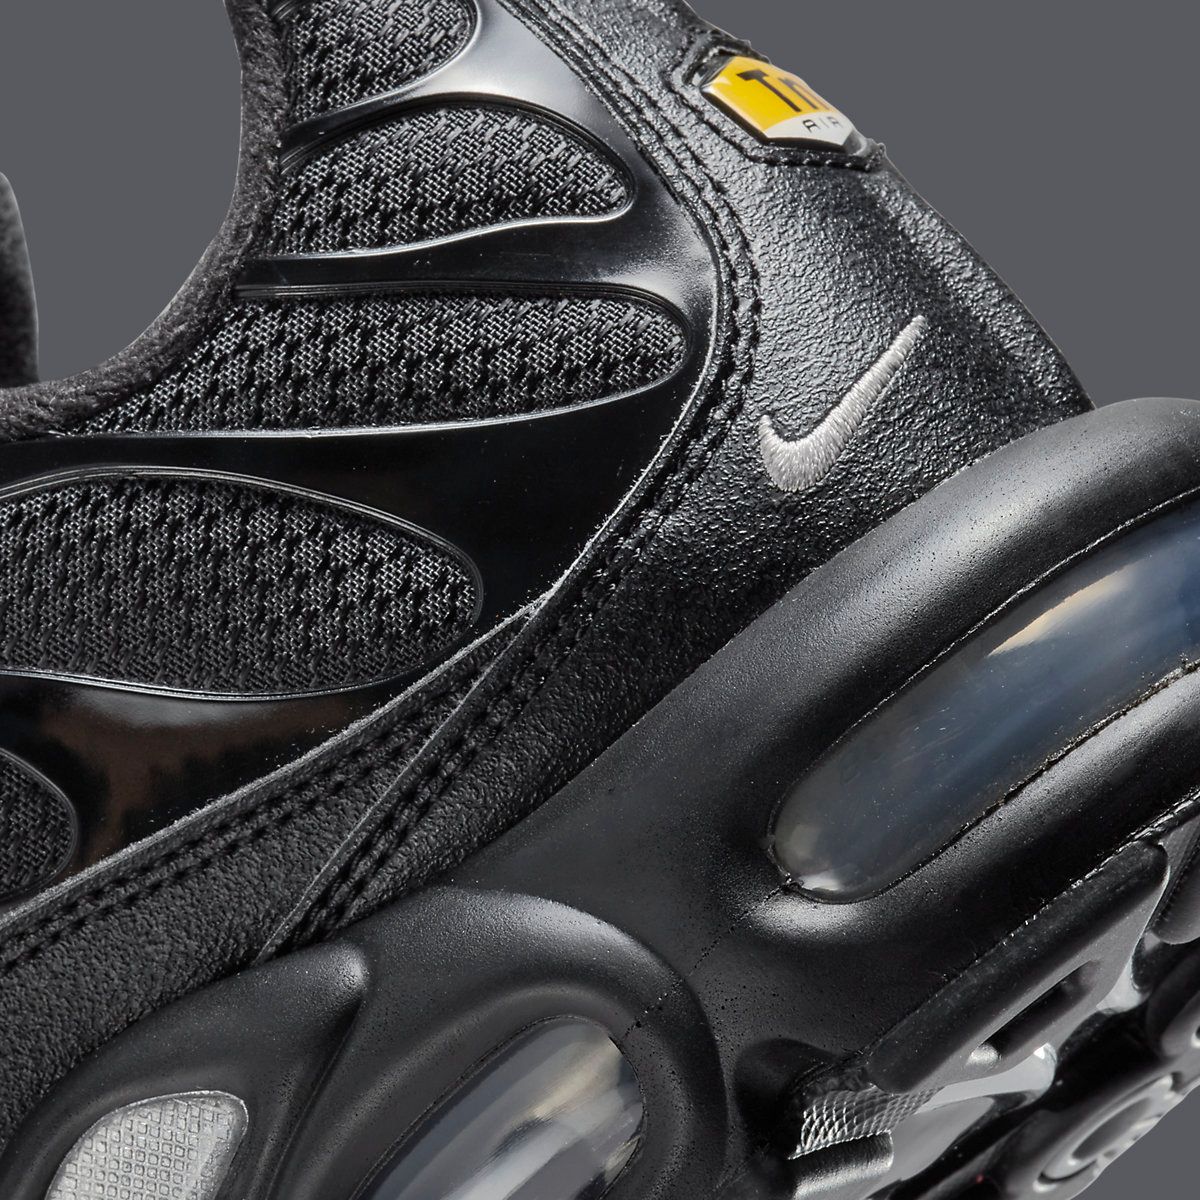 New Black and Silver Air Max Plus Boasts Extra Swooshes and 3M Finishes ...